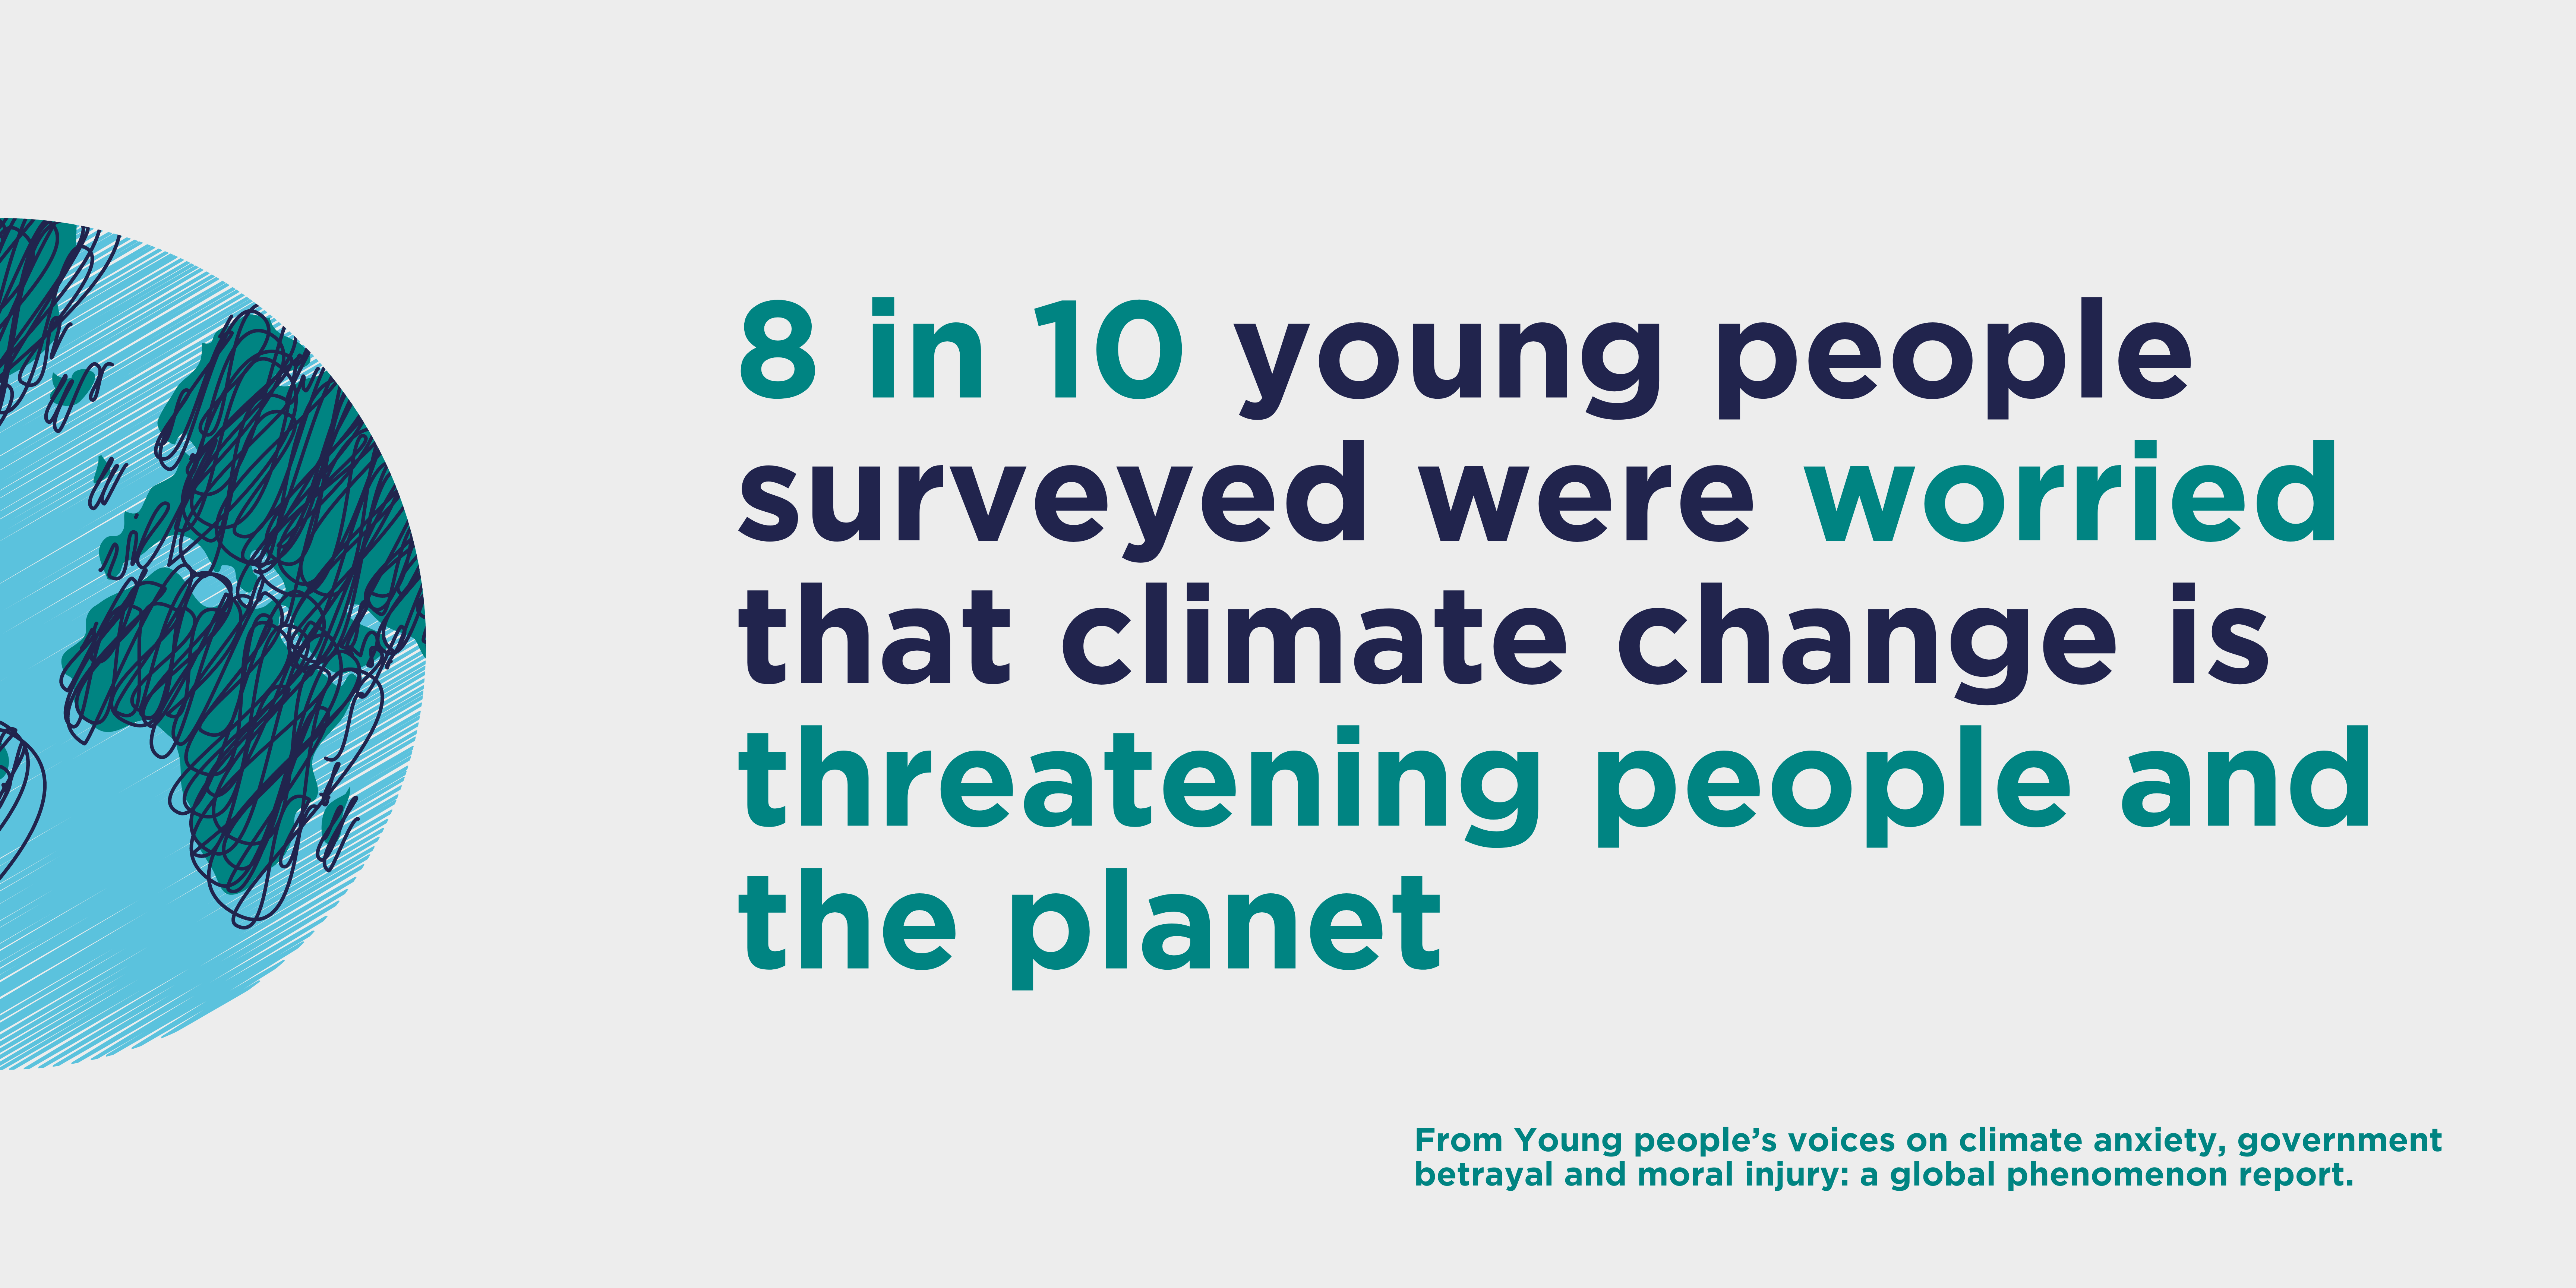 8 in 10 young people surveyed were worried that climate change is threatening people and the planet